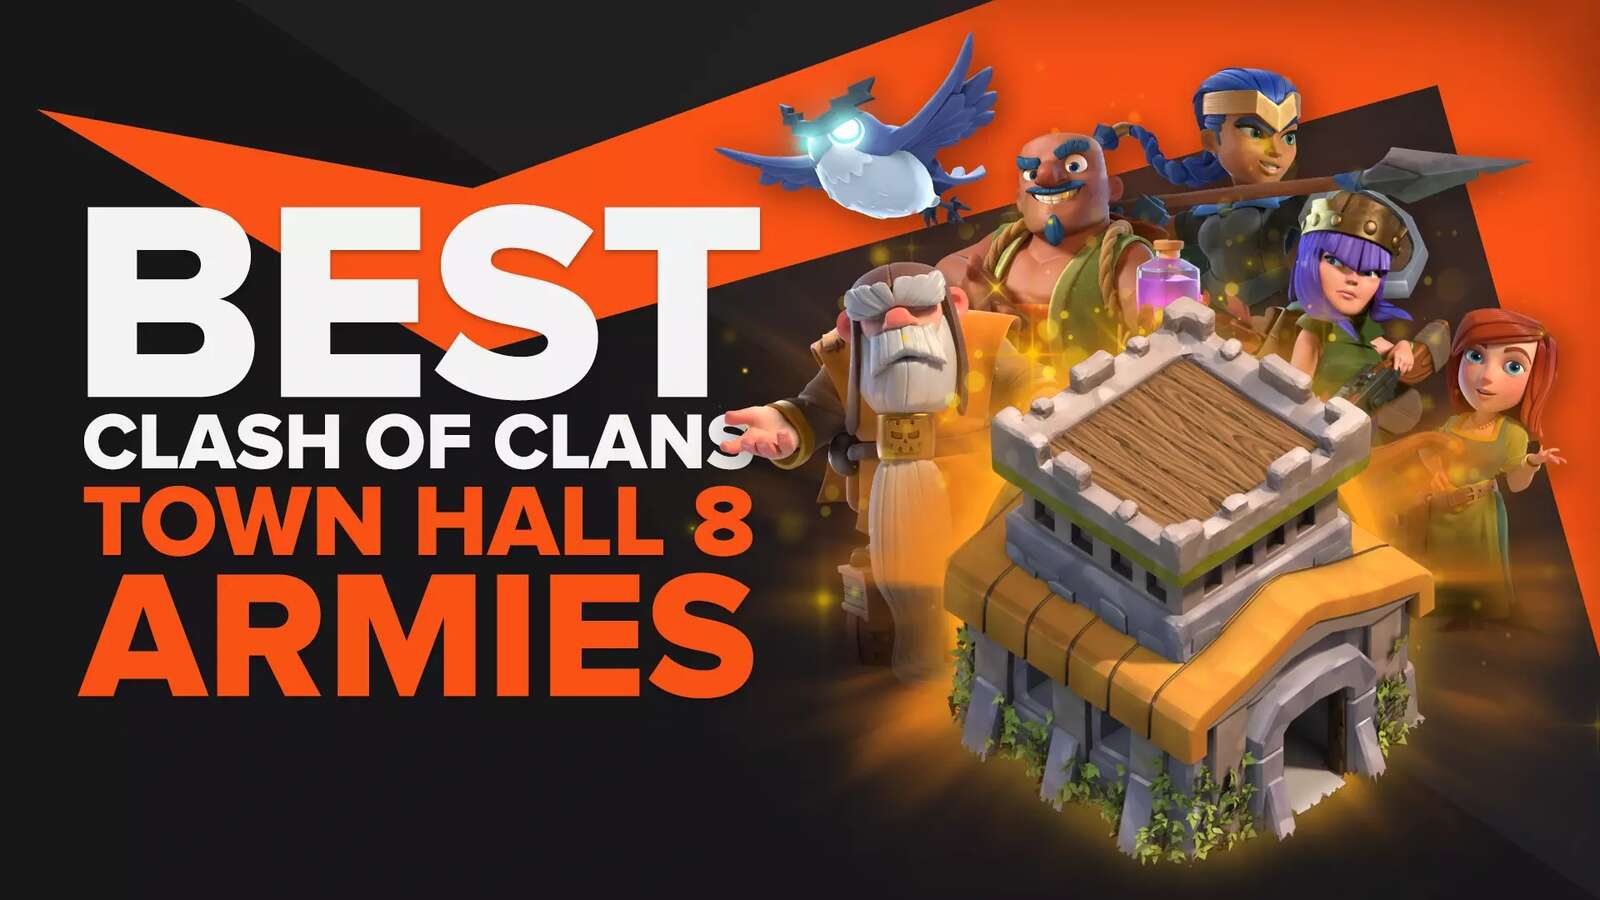 What Is The Best Army In Clash of Clans For Town Hall 8?